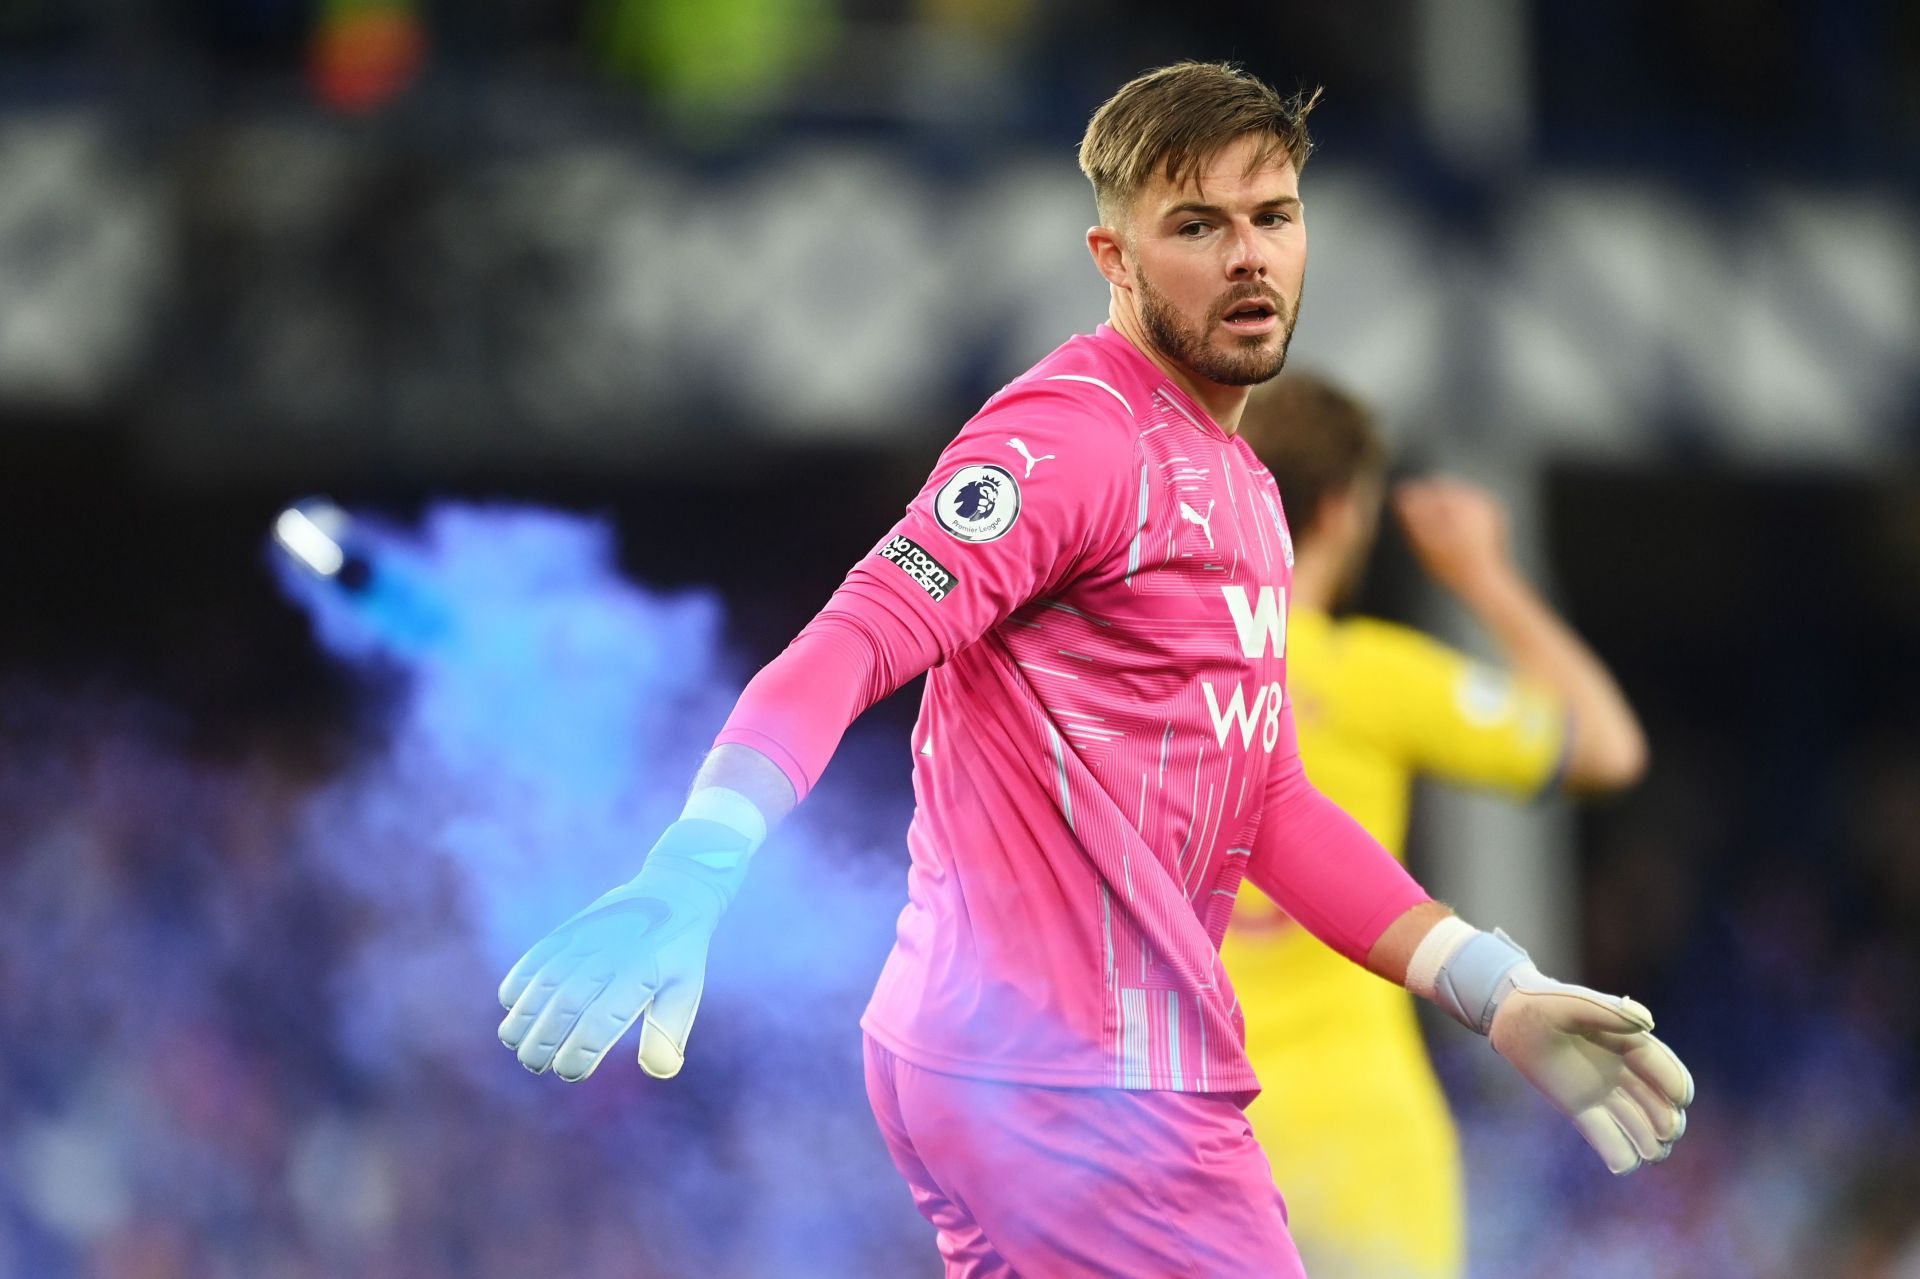 Butland is set to seal a loan move to Manchester United.